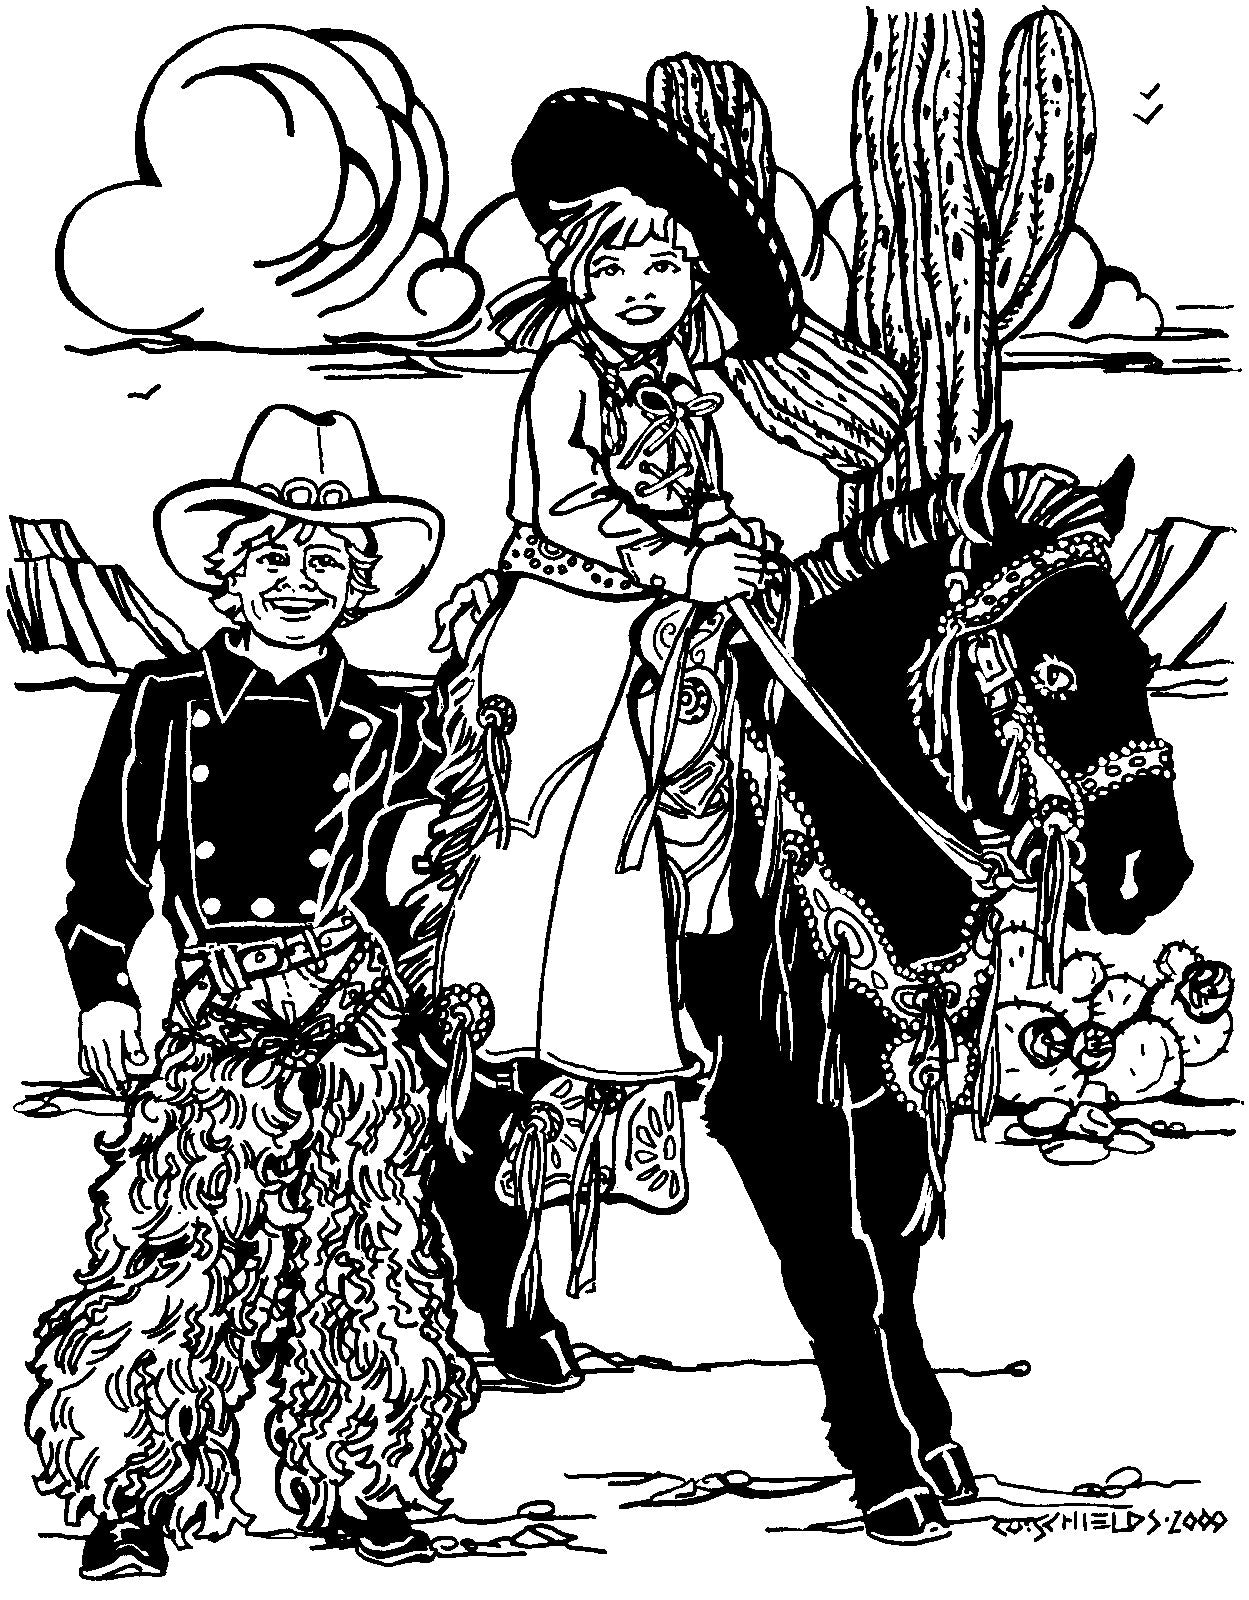 Black and white pen and ink drawing of two children in a western setting a boy standing next to a girl ridding a pony, both are wearing 218 Child's Frontier Shirt.